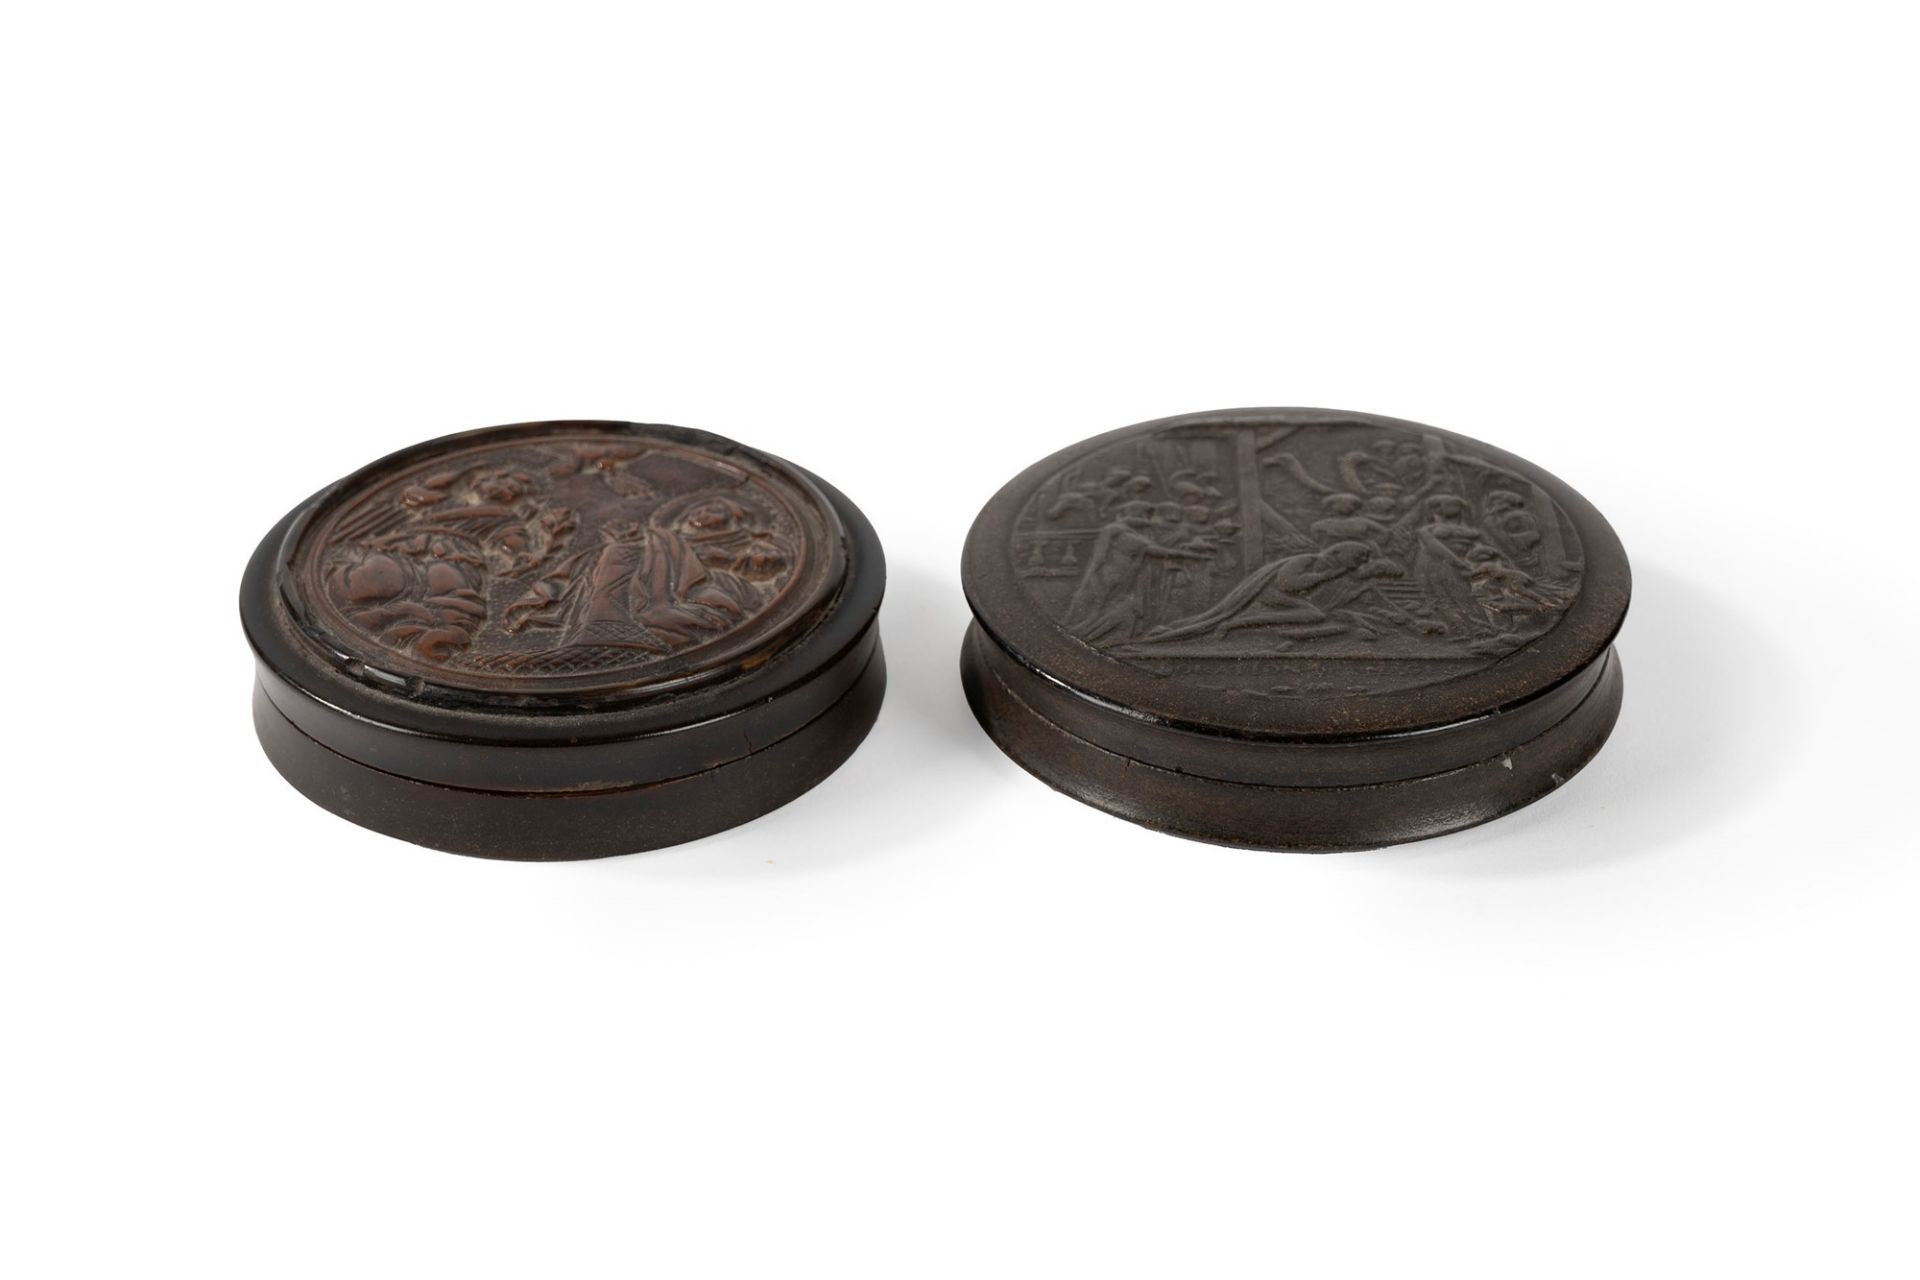 Lot consisting of two snuffboxes with religious scenes on the lid, 19th century